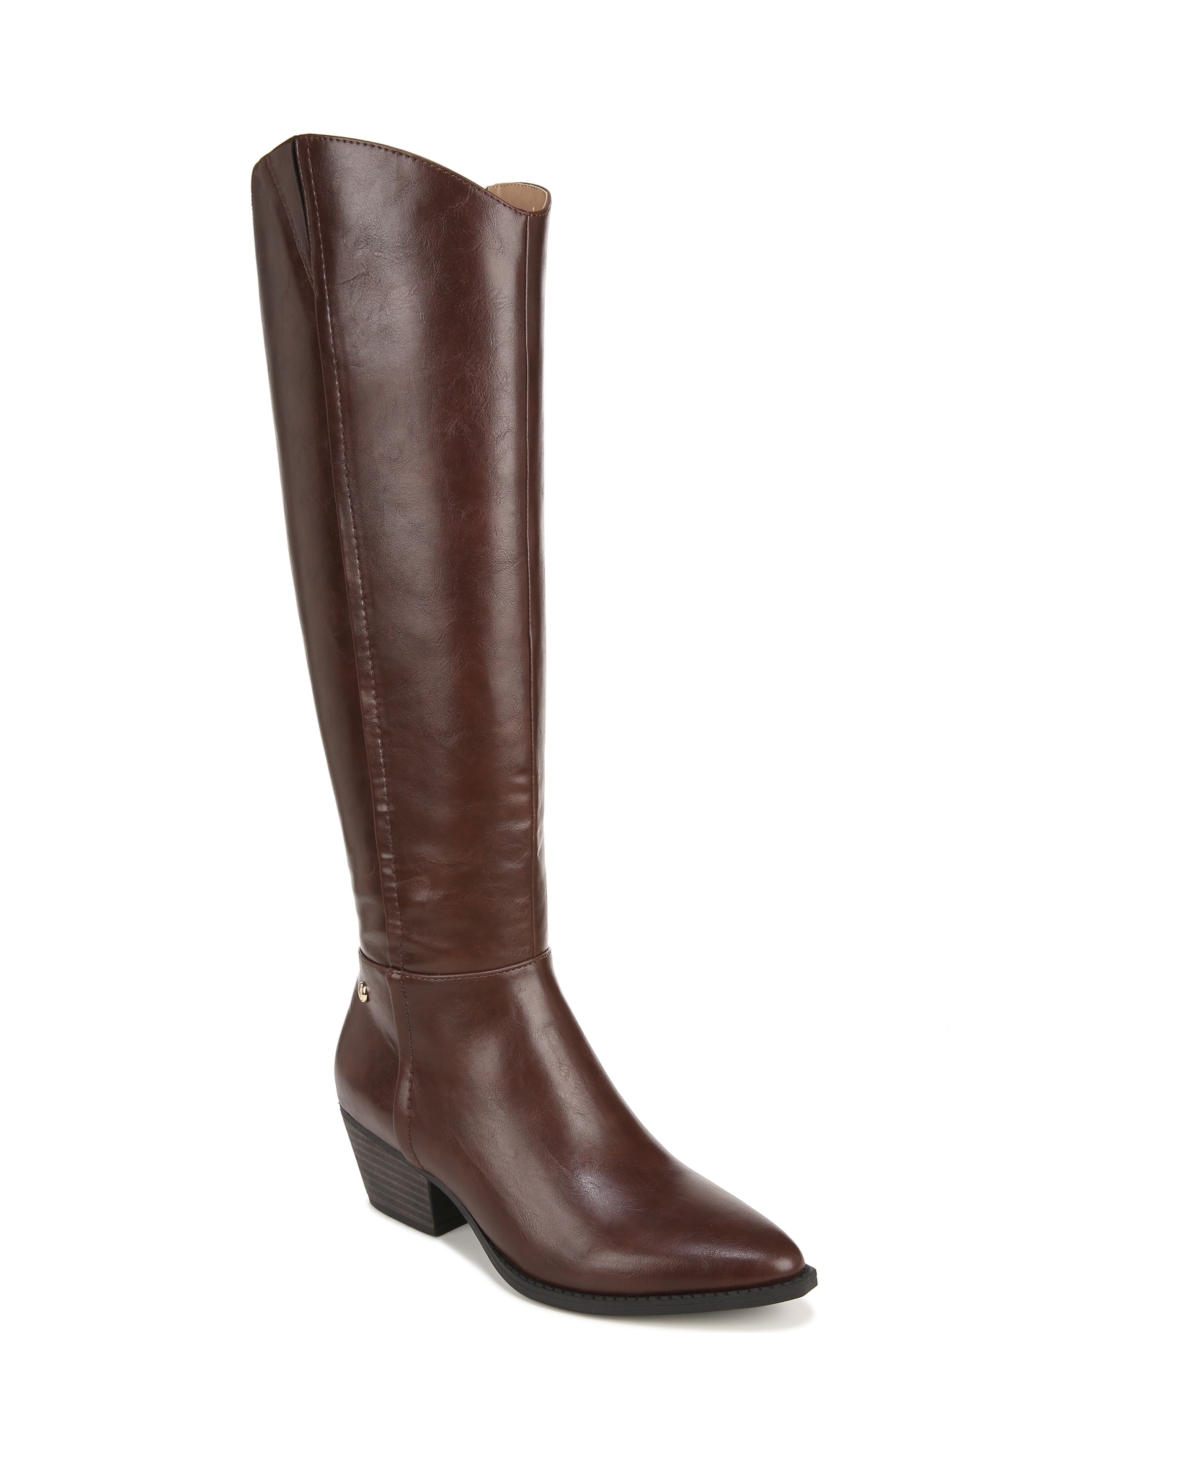 Reese Wide Calf Knee High Boots - Chestnut Faux Leather